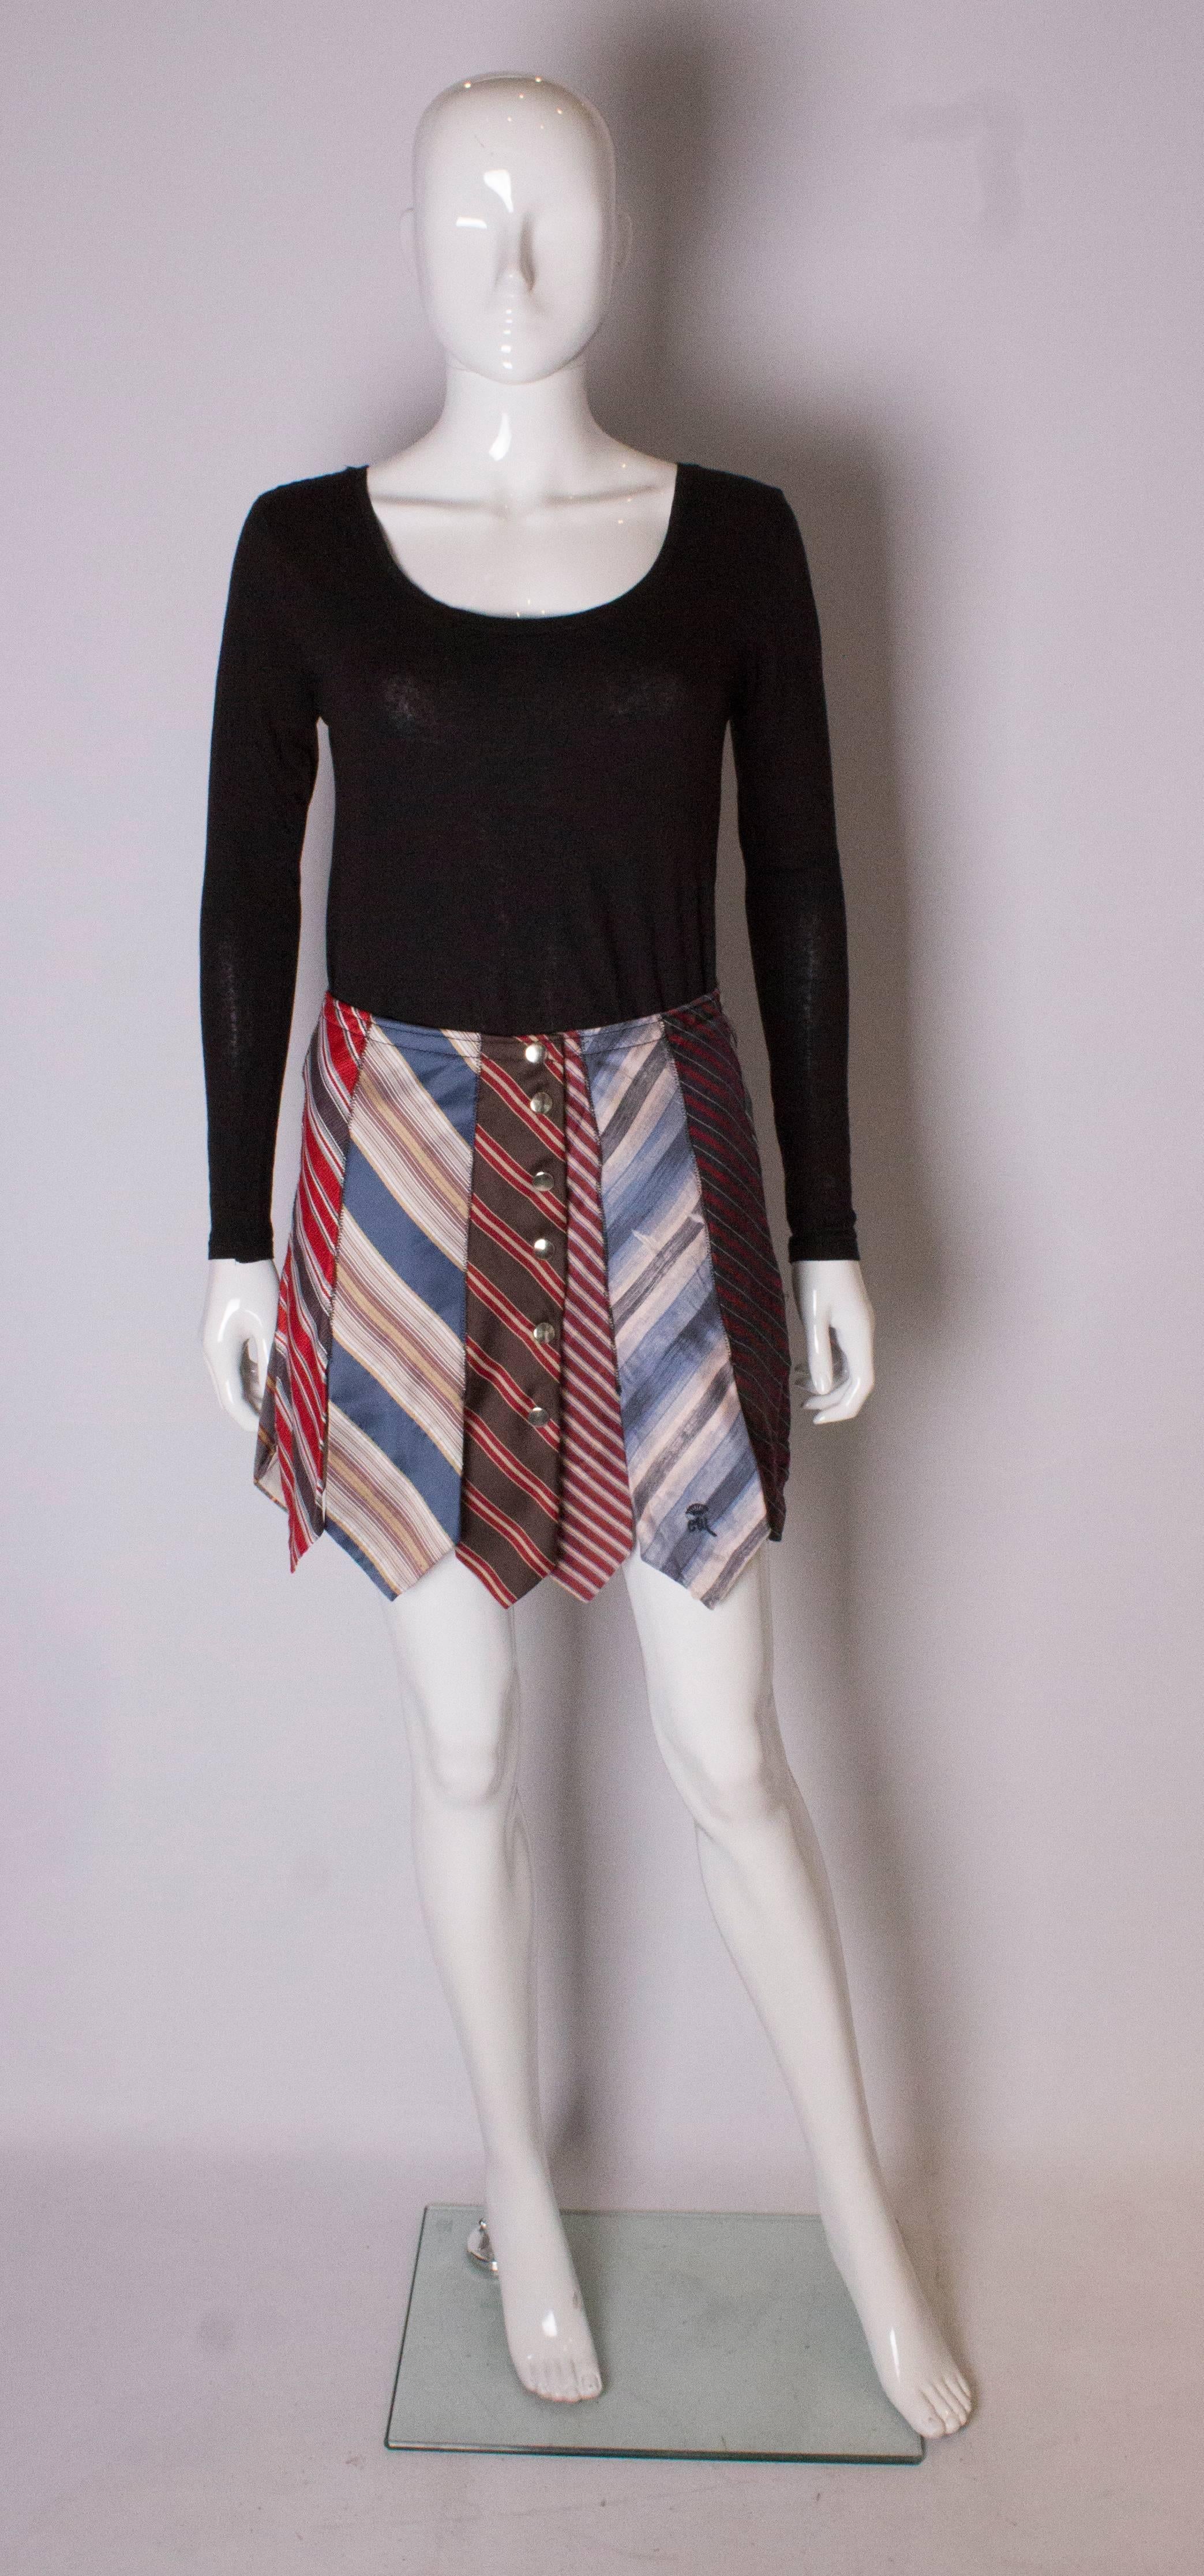 A fun skirt for summer. The skirt is made out of vintage silk  ties of varying colours.  The skirt is A line, and  has a popper fastening at the front.